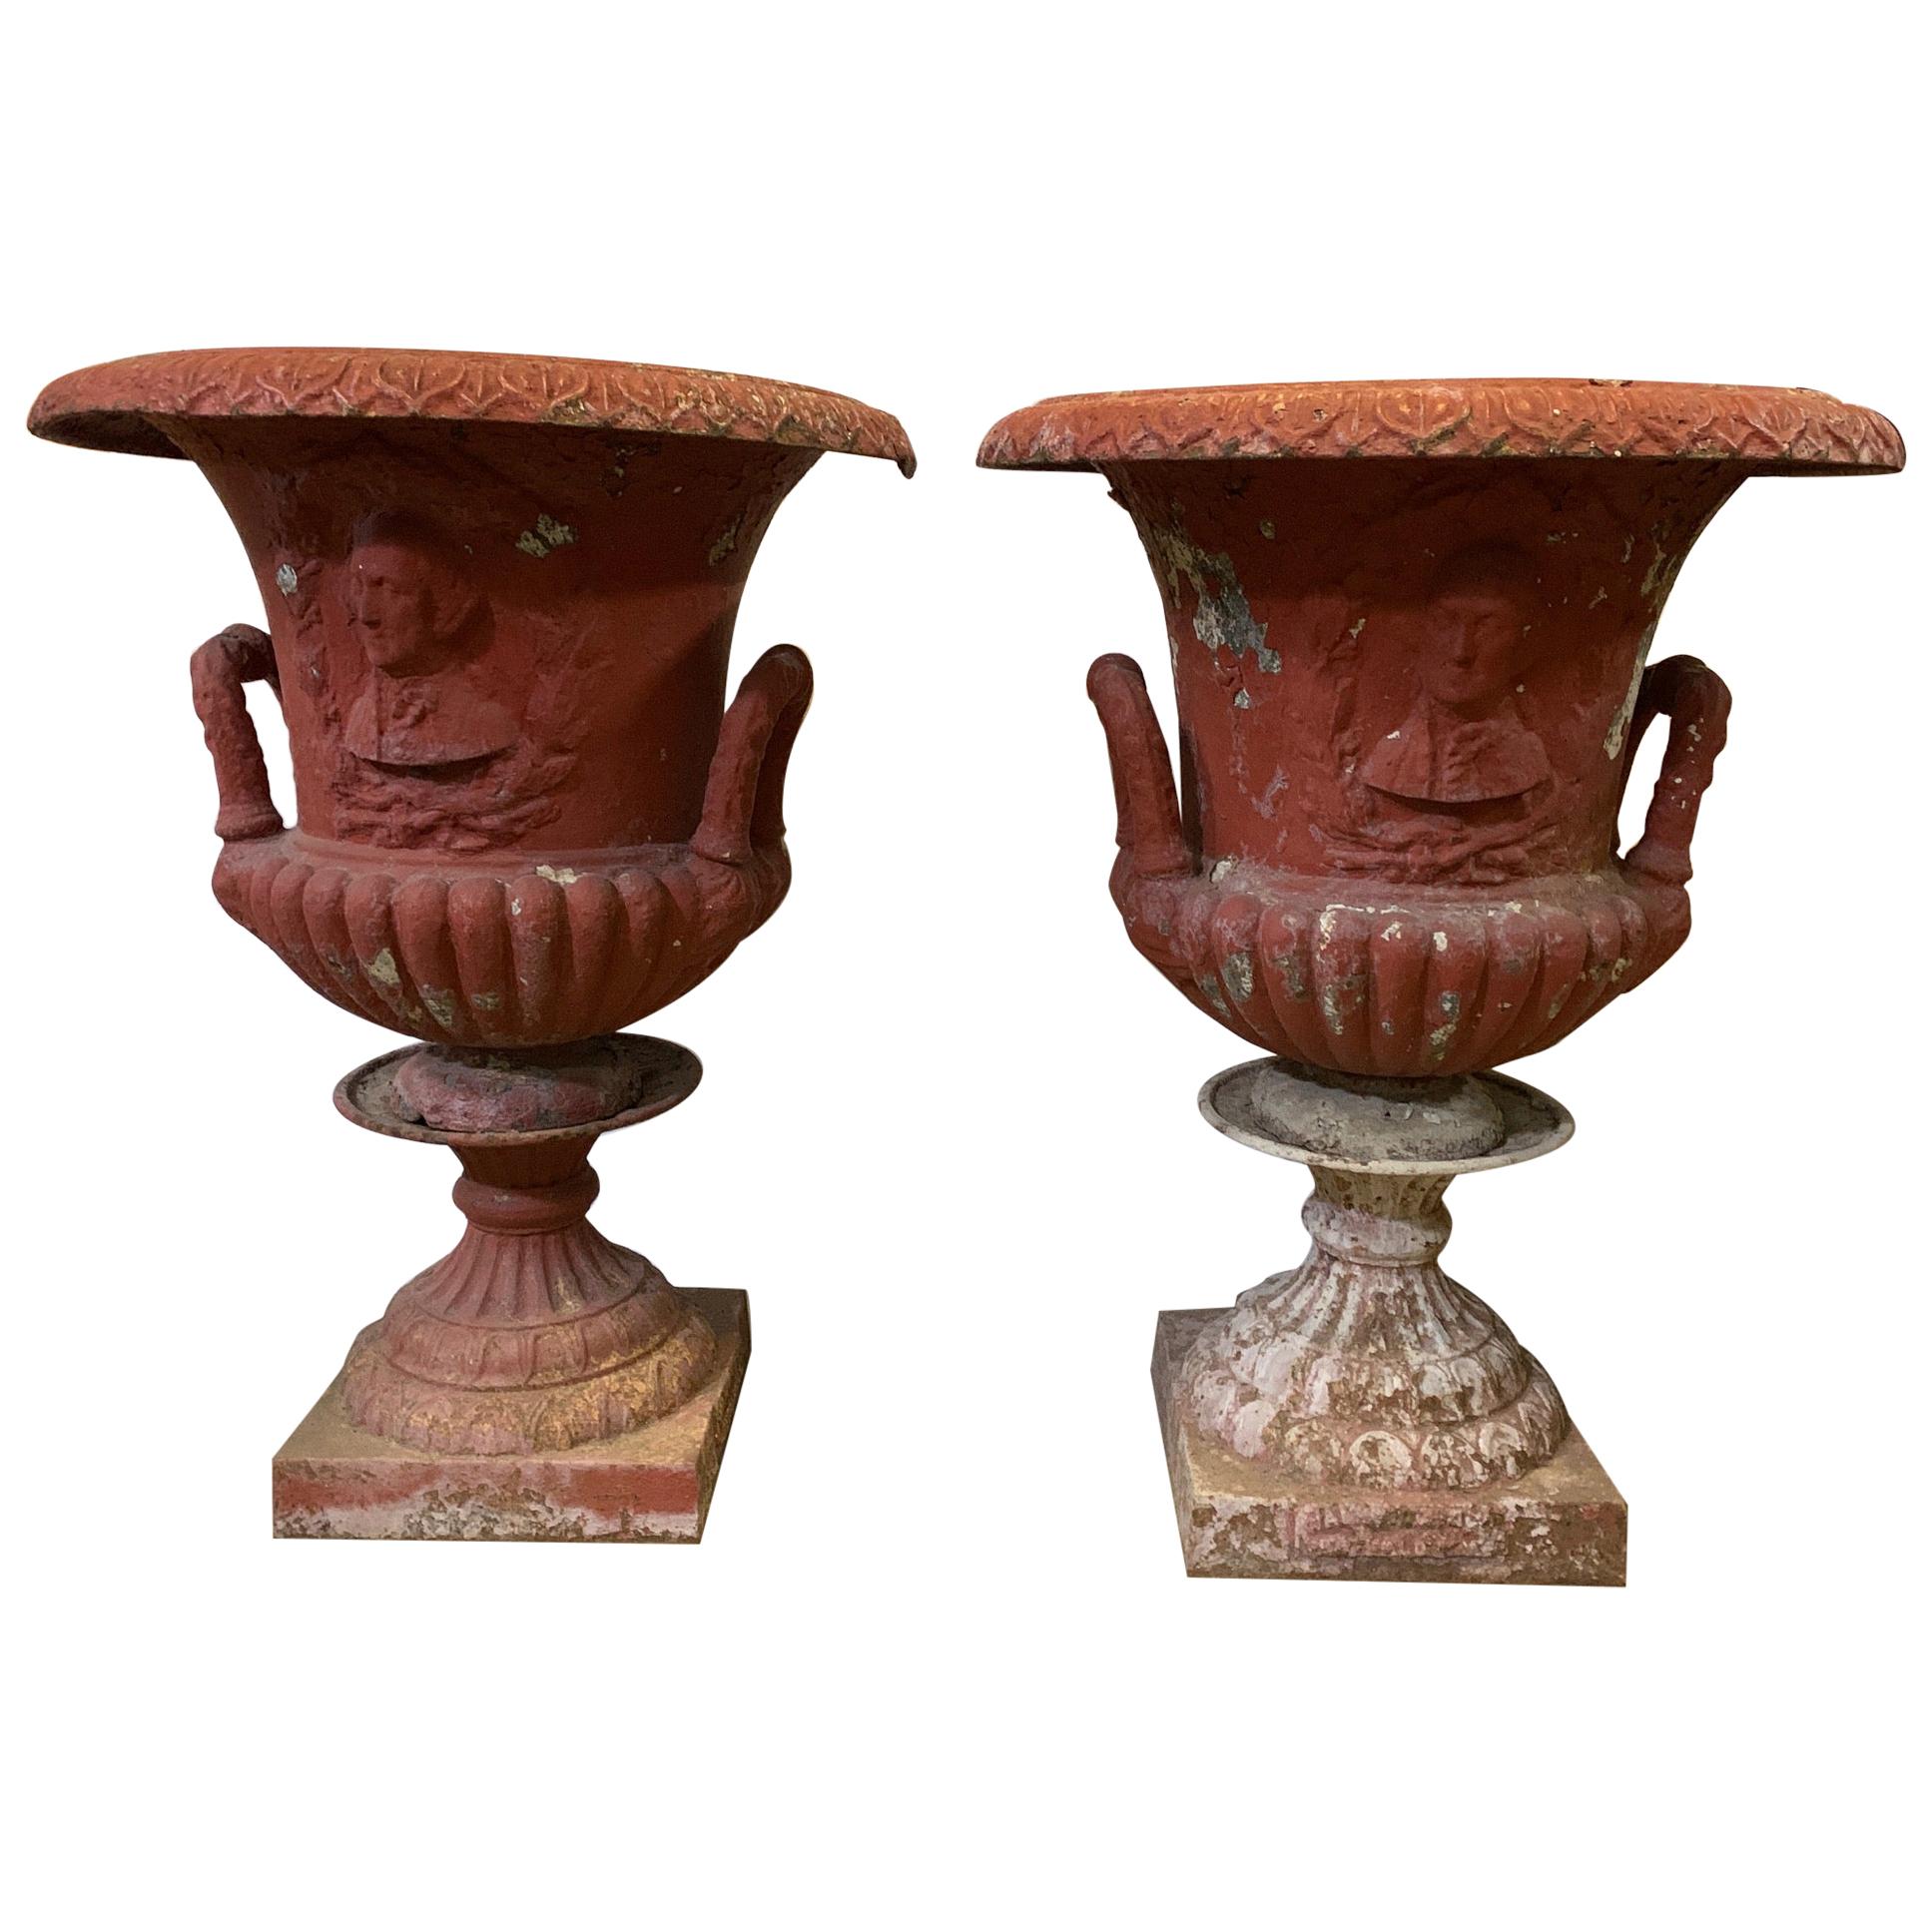 Large Pair of American Garden Cast Iron Urns with a Plaque of George Washington 